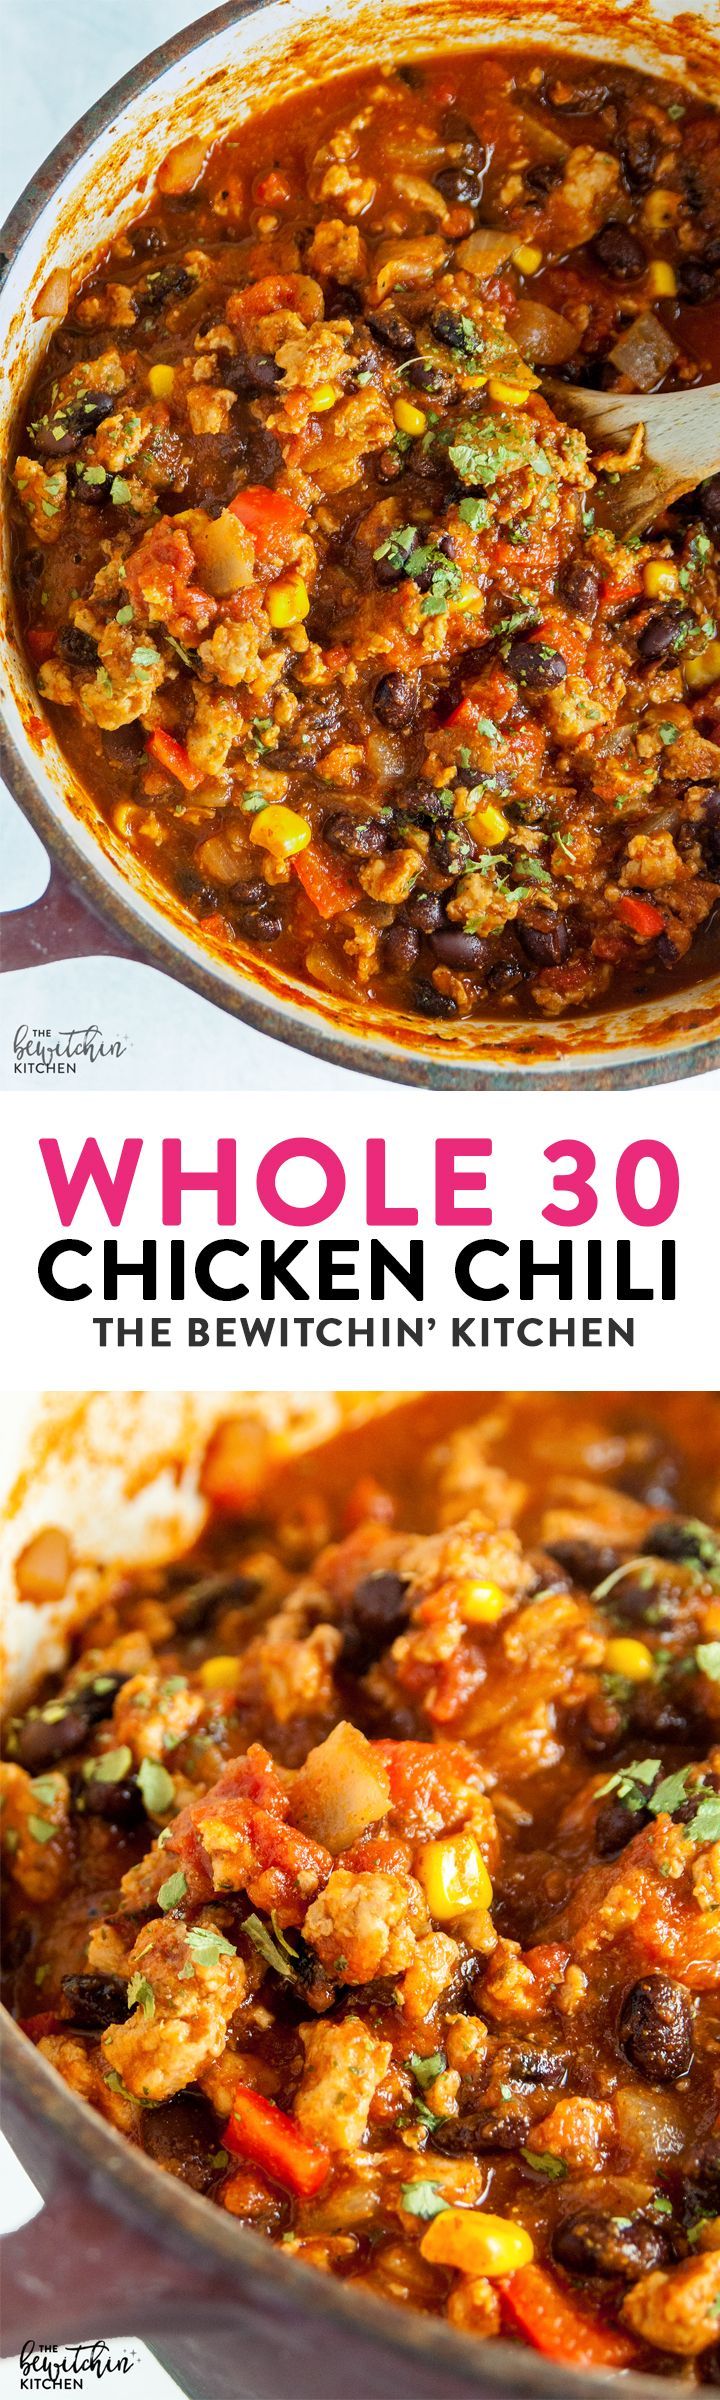 Whole30 Chicken Chili a hearty and healthy chili recipe is lightened up with ground chicken and is whole 30, paleo, and 21 day fix